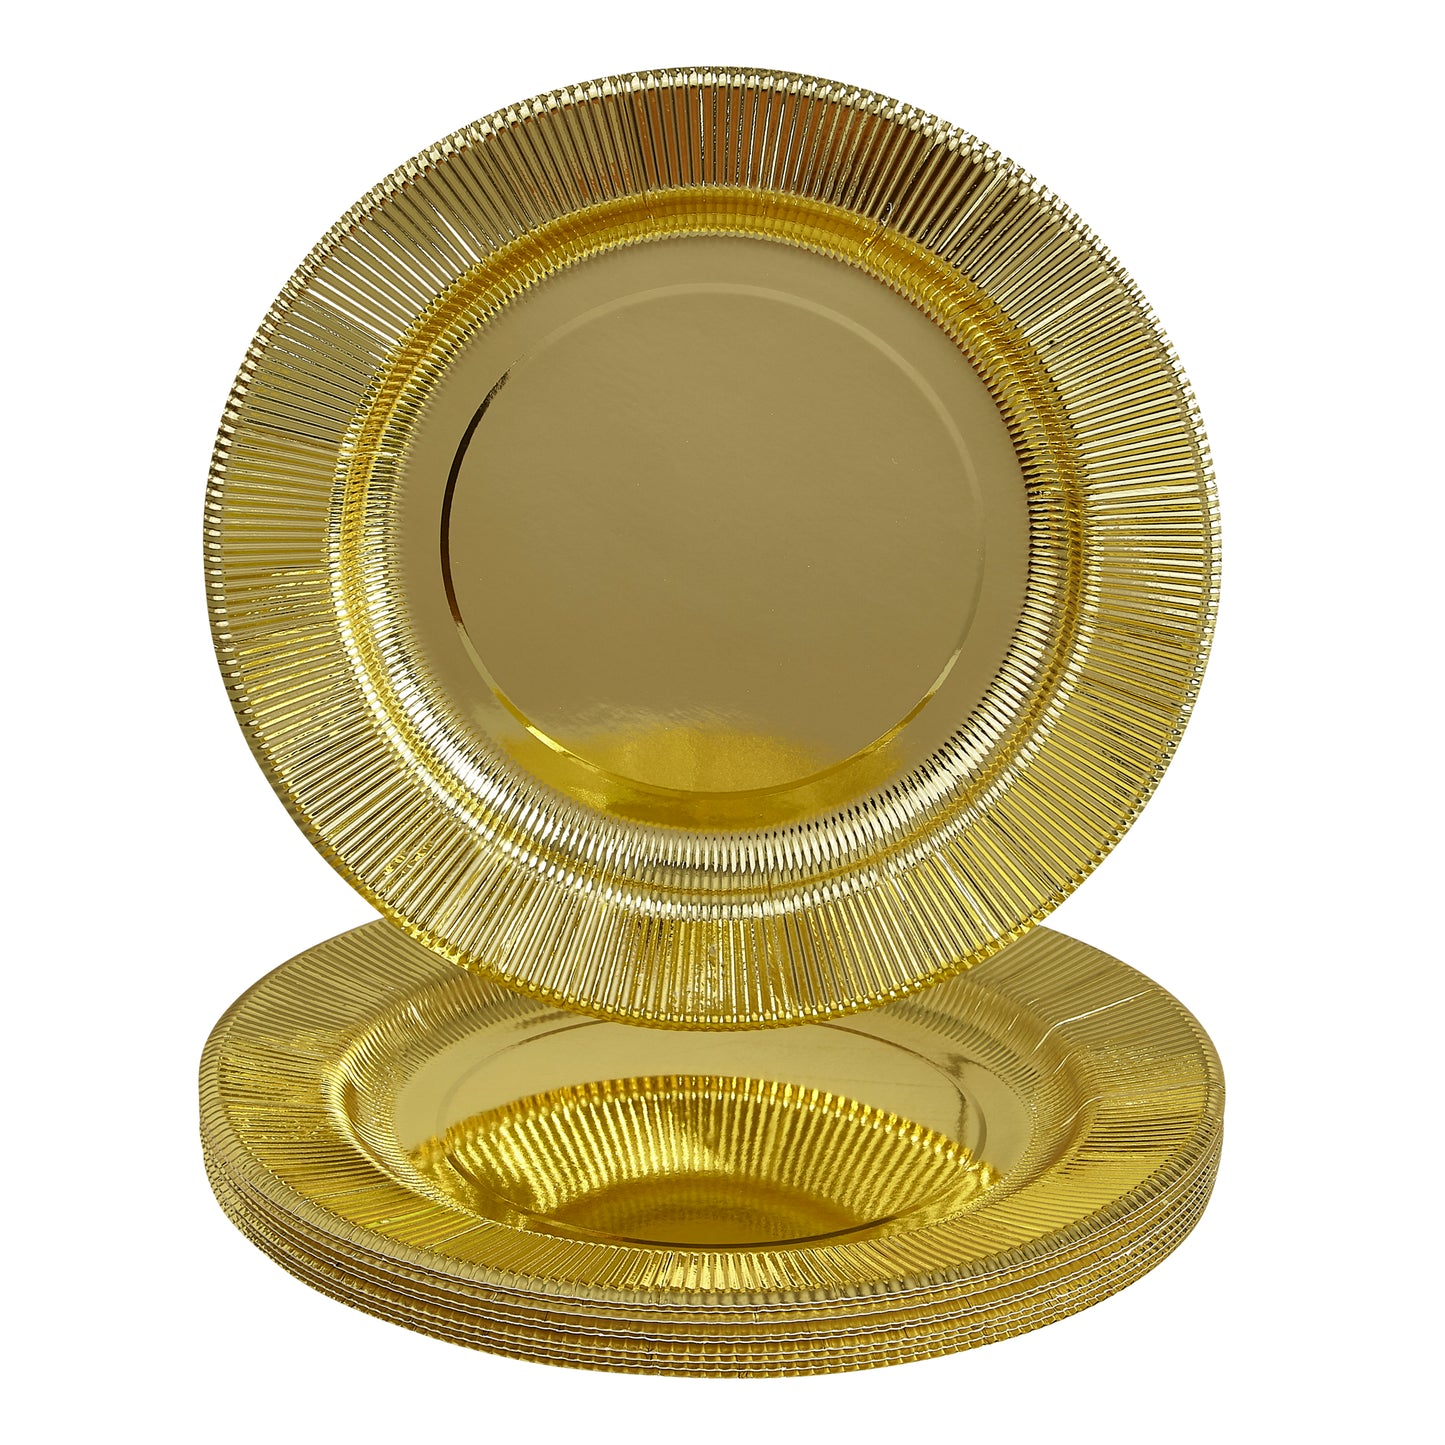 Ruffled Gold Charger Plate